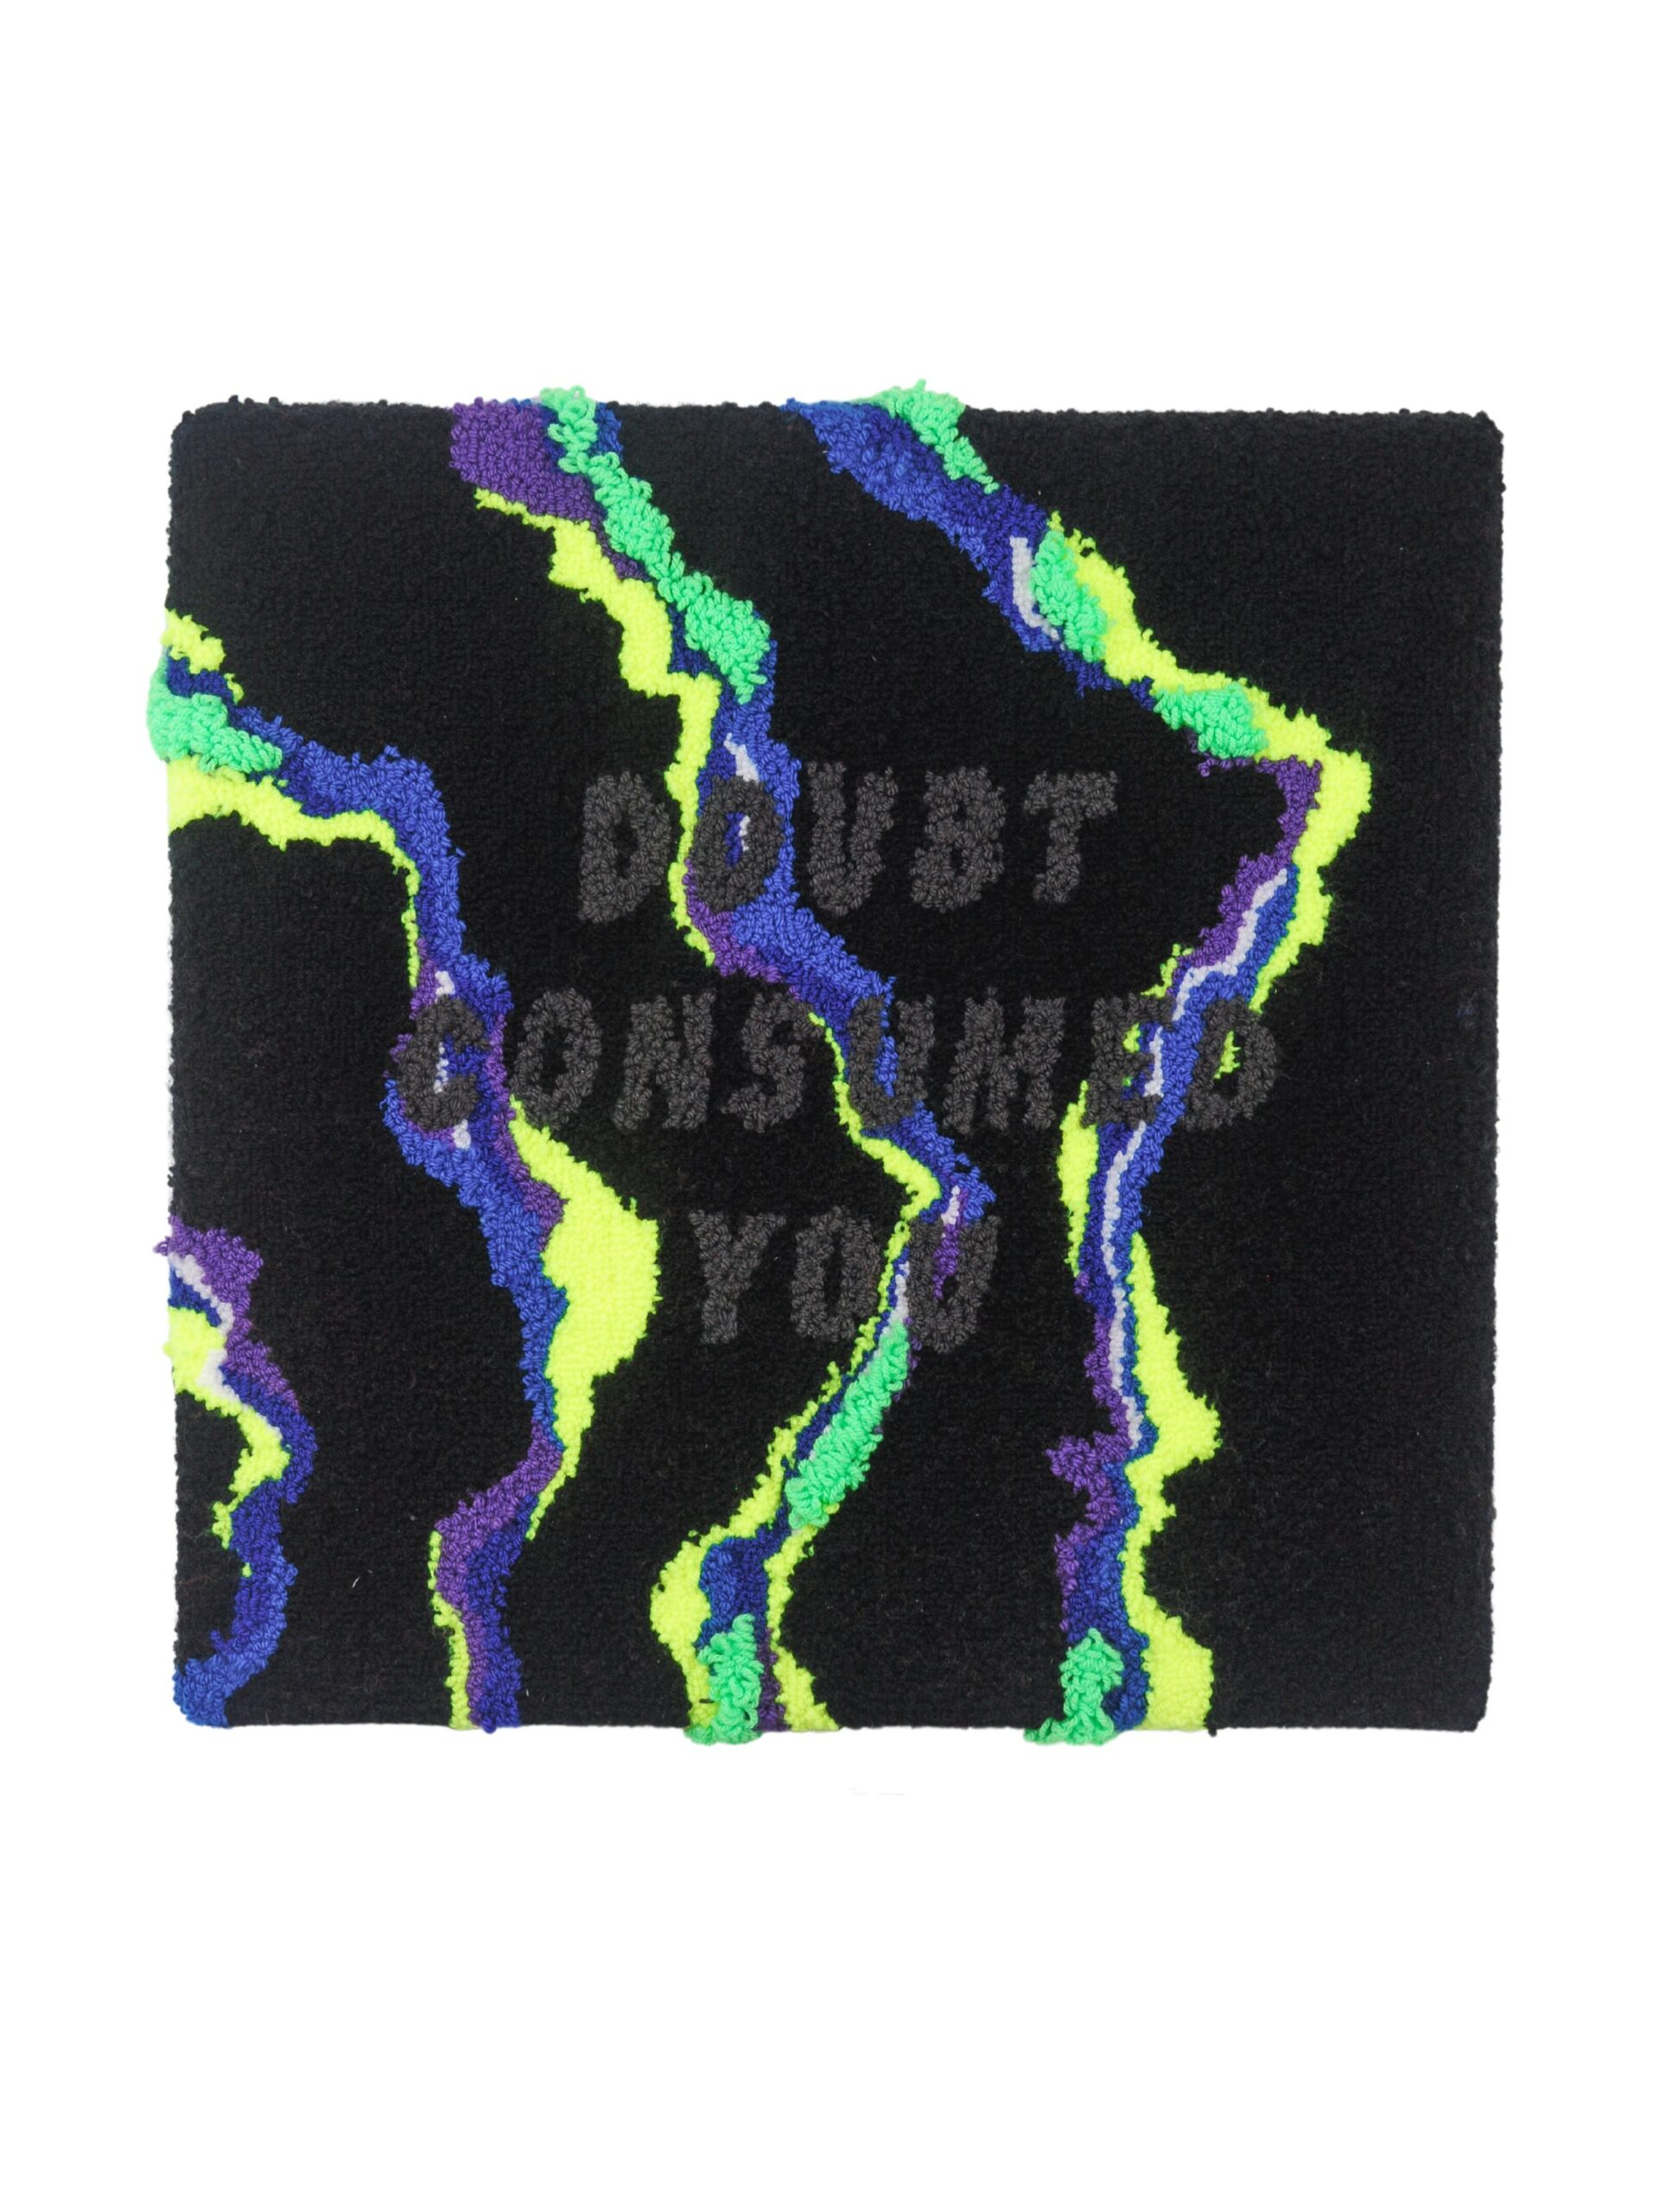 Fabric glued together in neon green, blue, yellow, and black with text